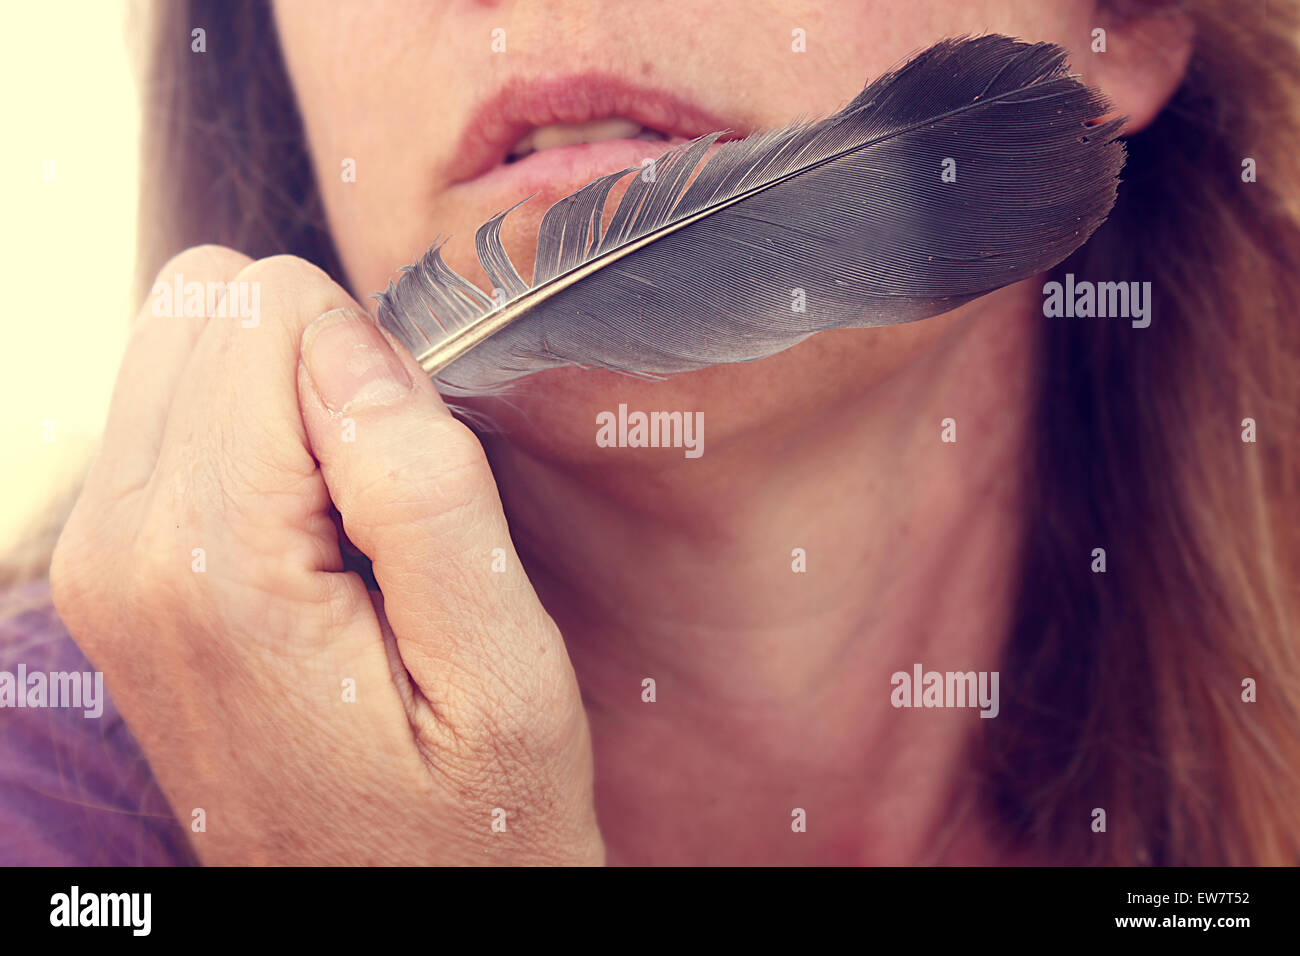 Close up of a woman holding a feather close to her face Stock Photo